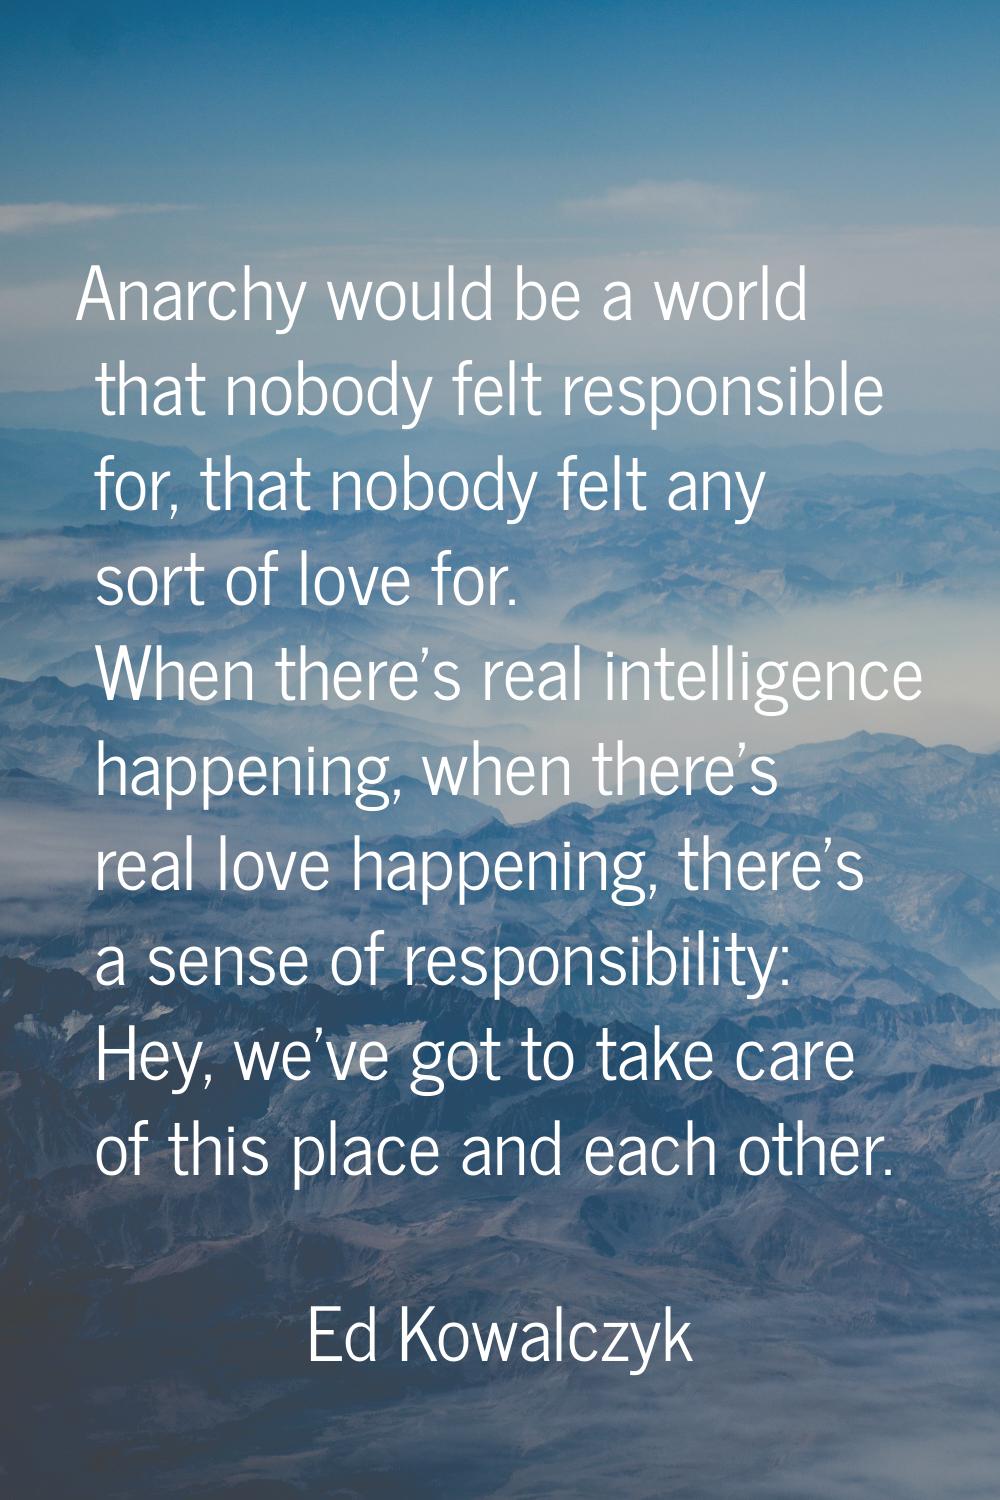 Anarchy would be a world that nobody felt responsible for, that nobody felt any sort of love for. W